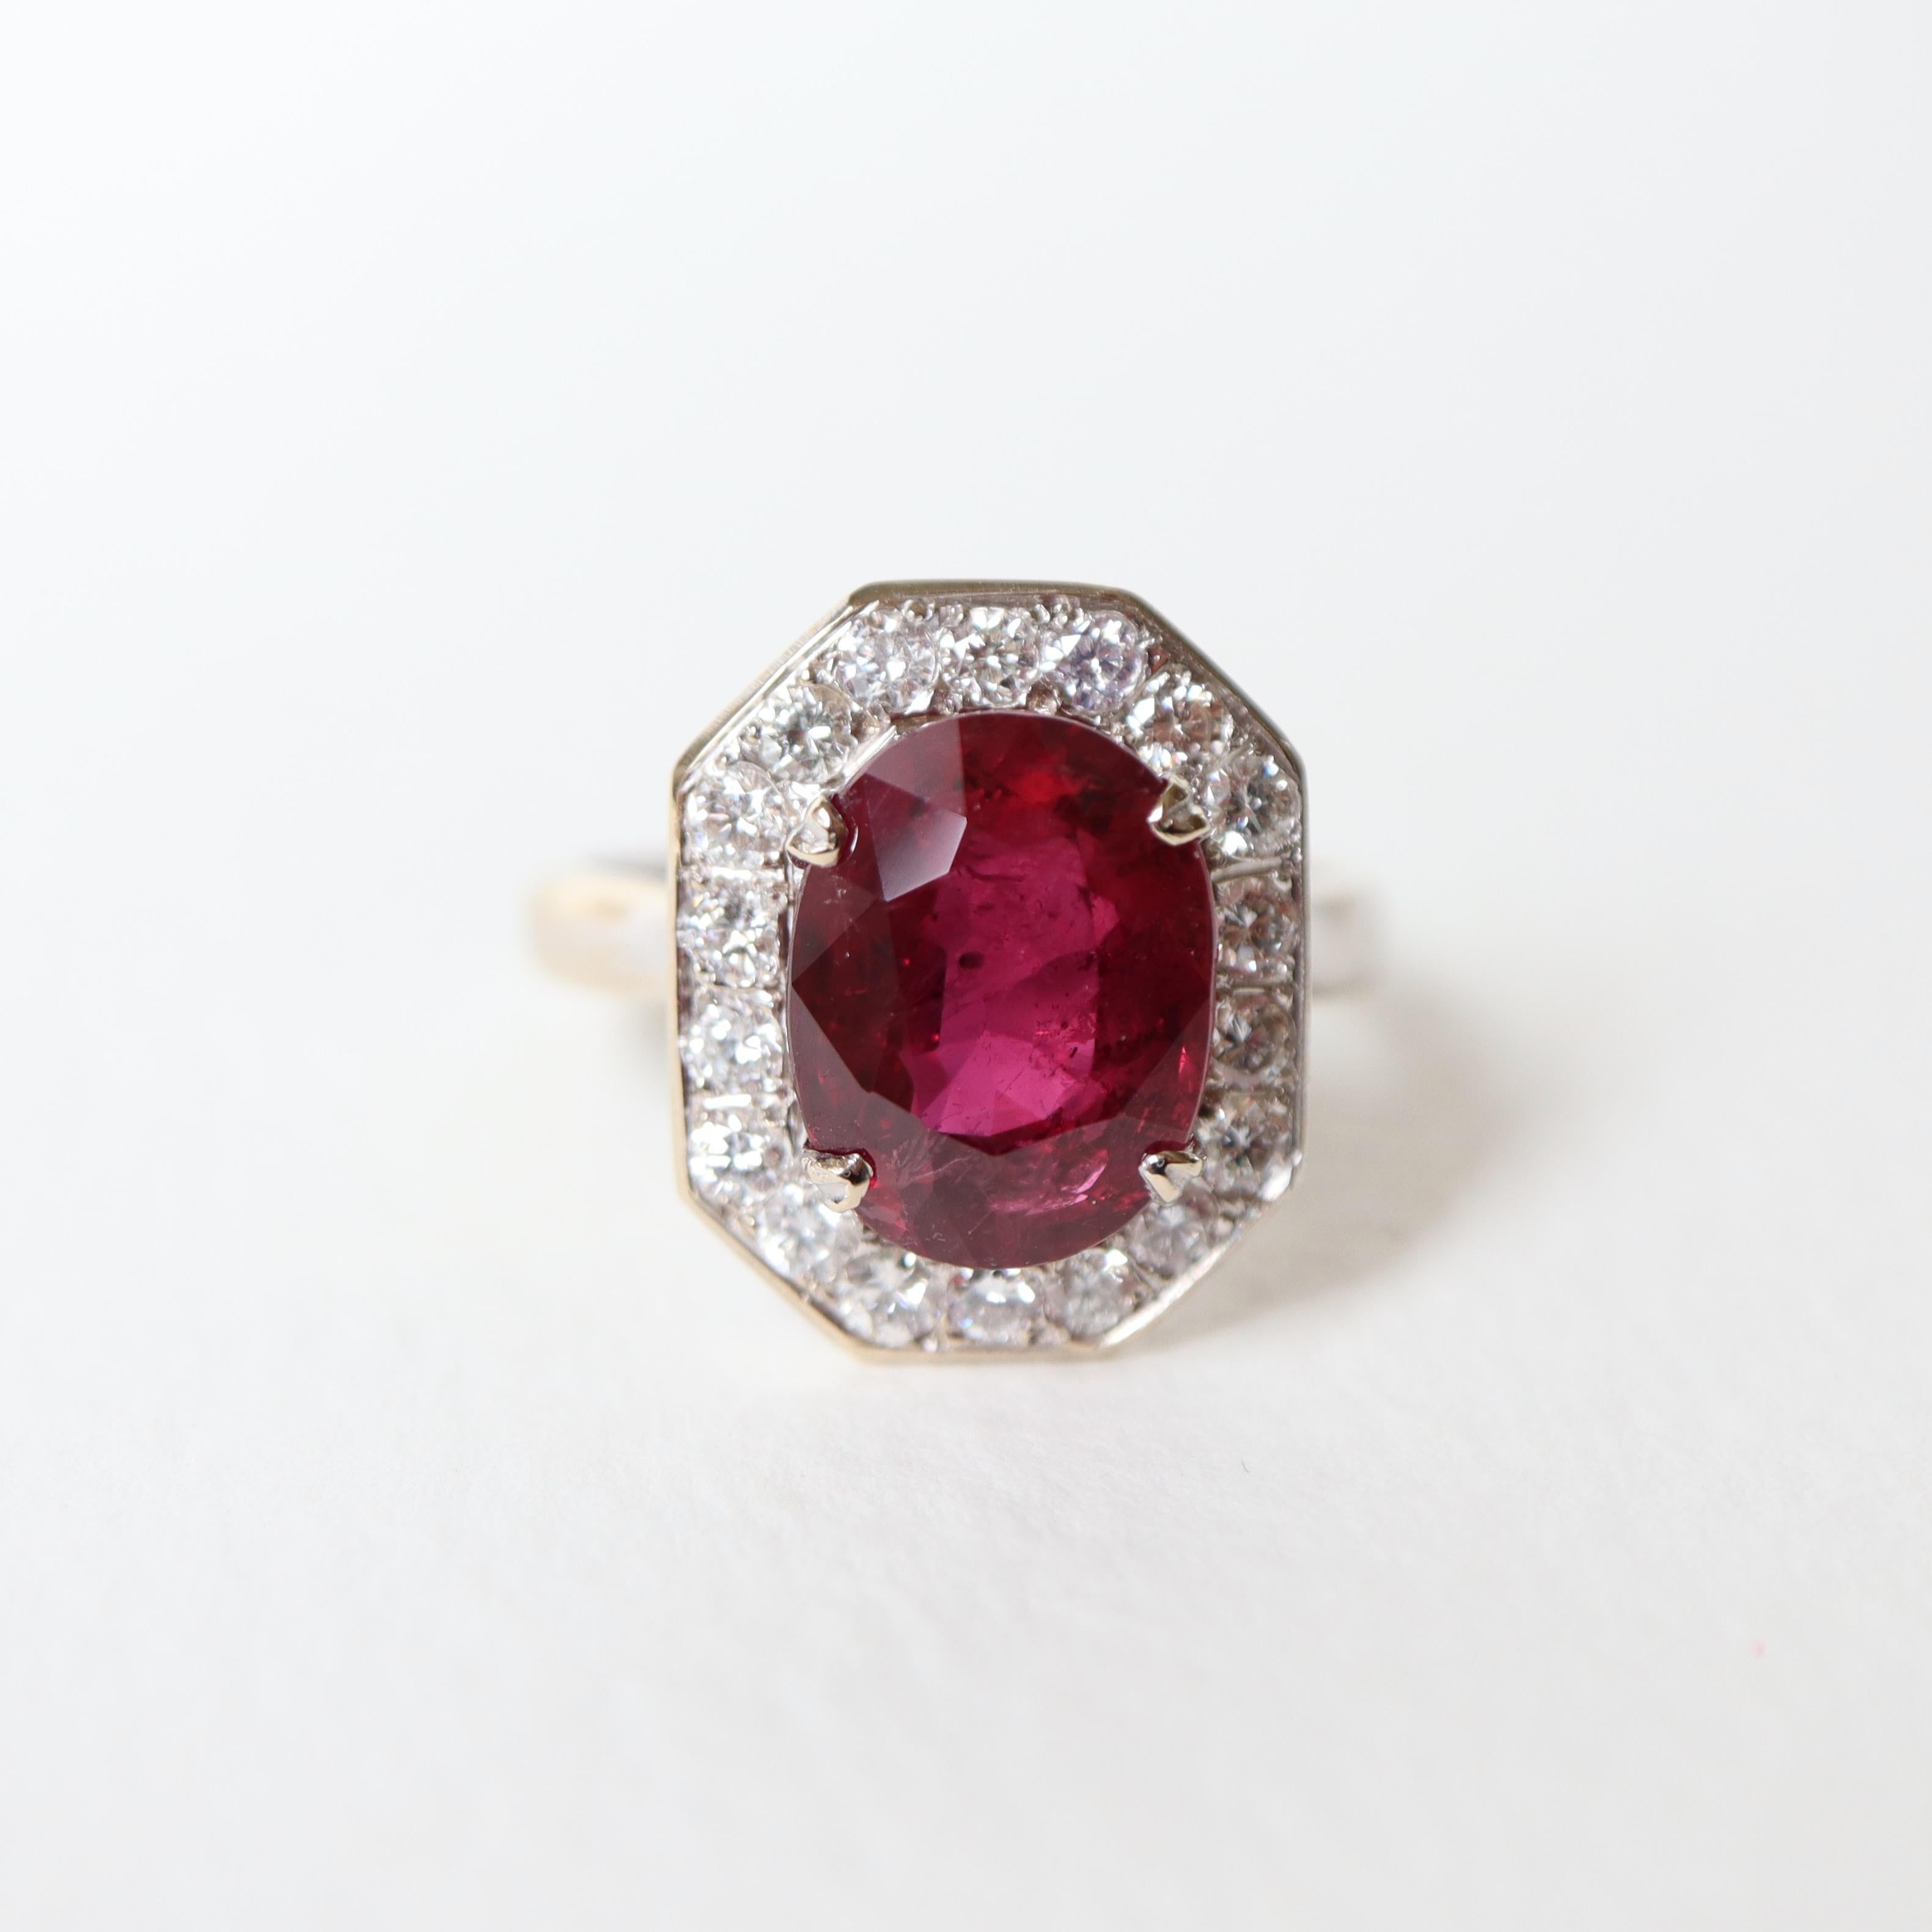 Oval Cut Ruby Ring in 18K White Gold, Diamonds and 5.02KT Ruby For Sale